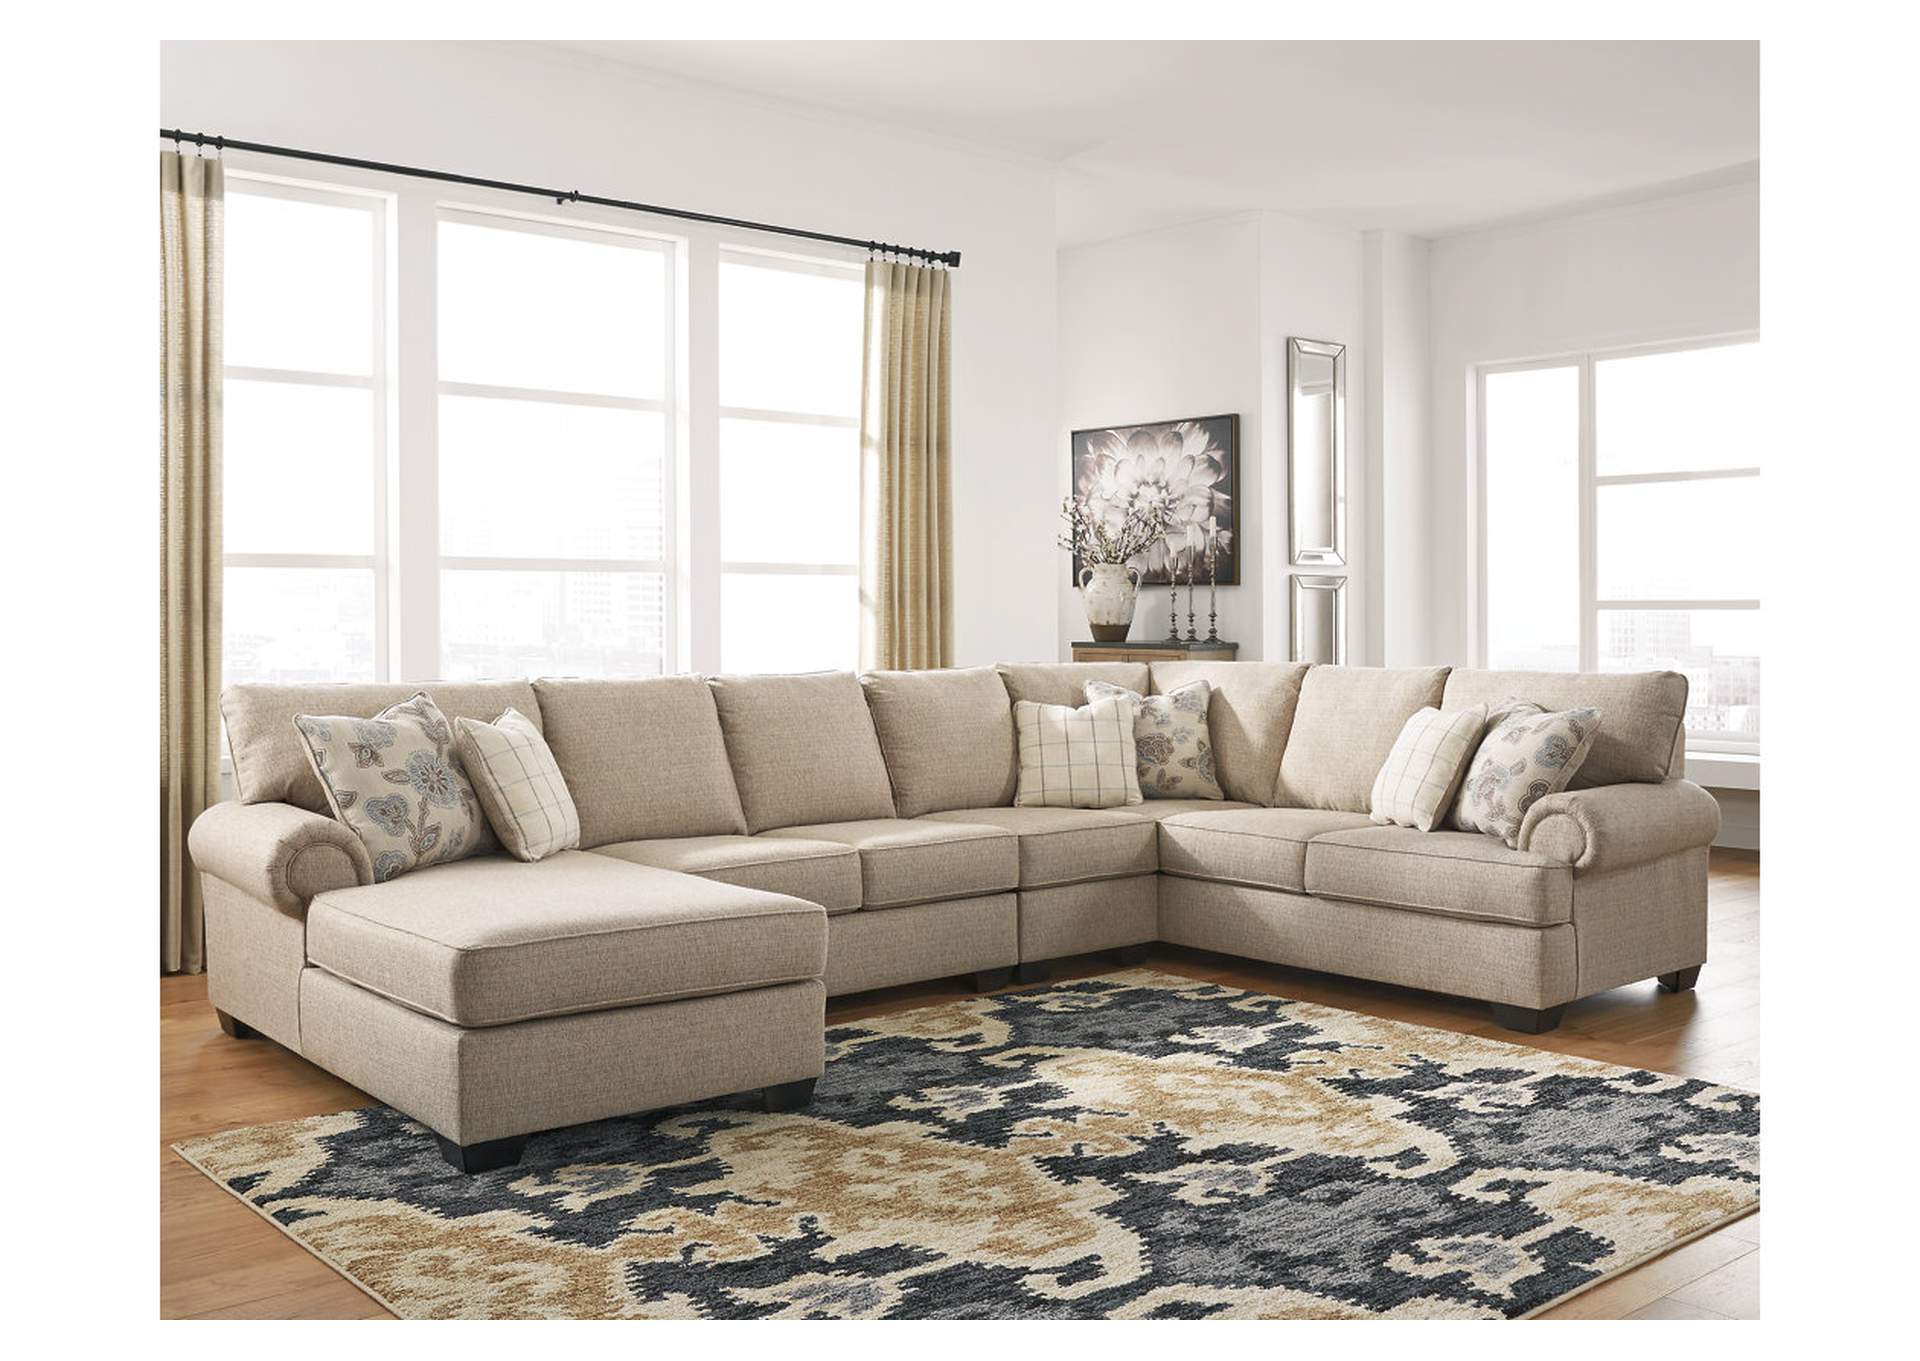 Baceno 4-Piece Sectional with Chaise,Ashley